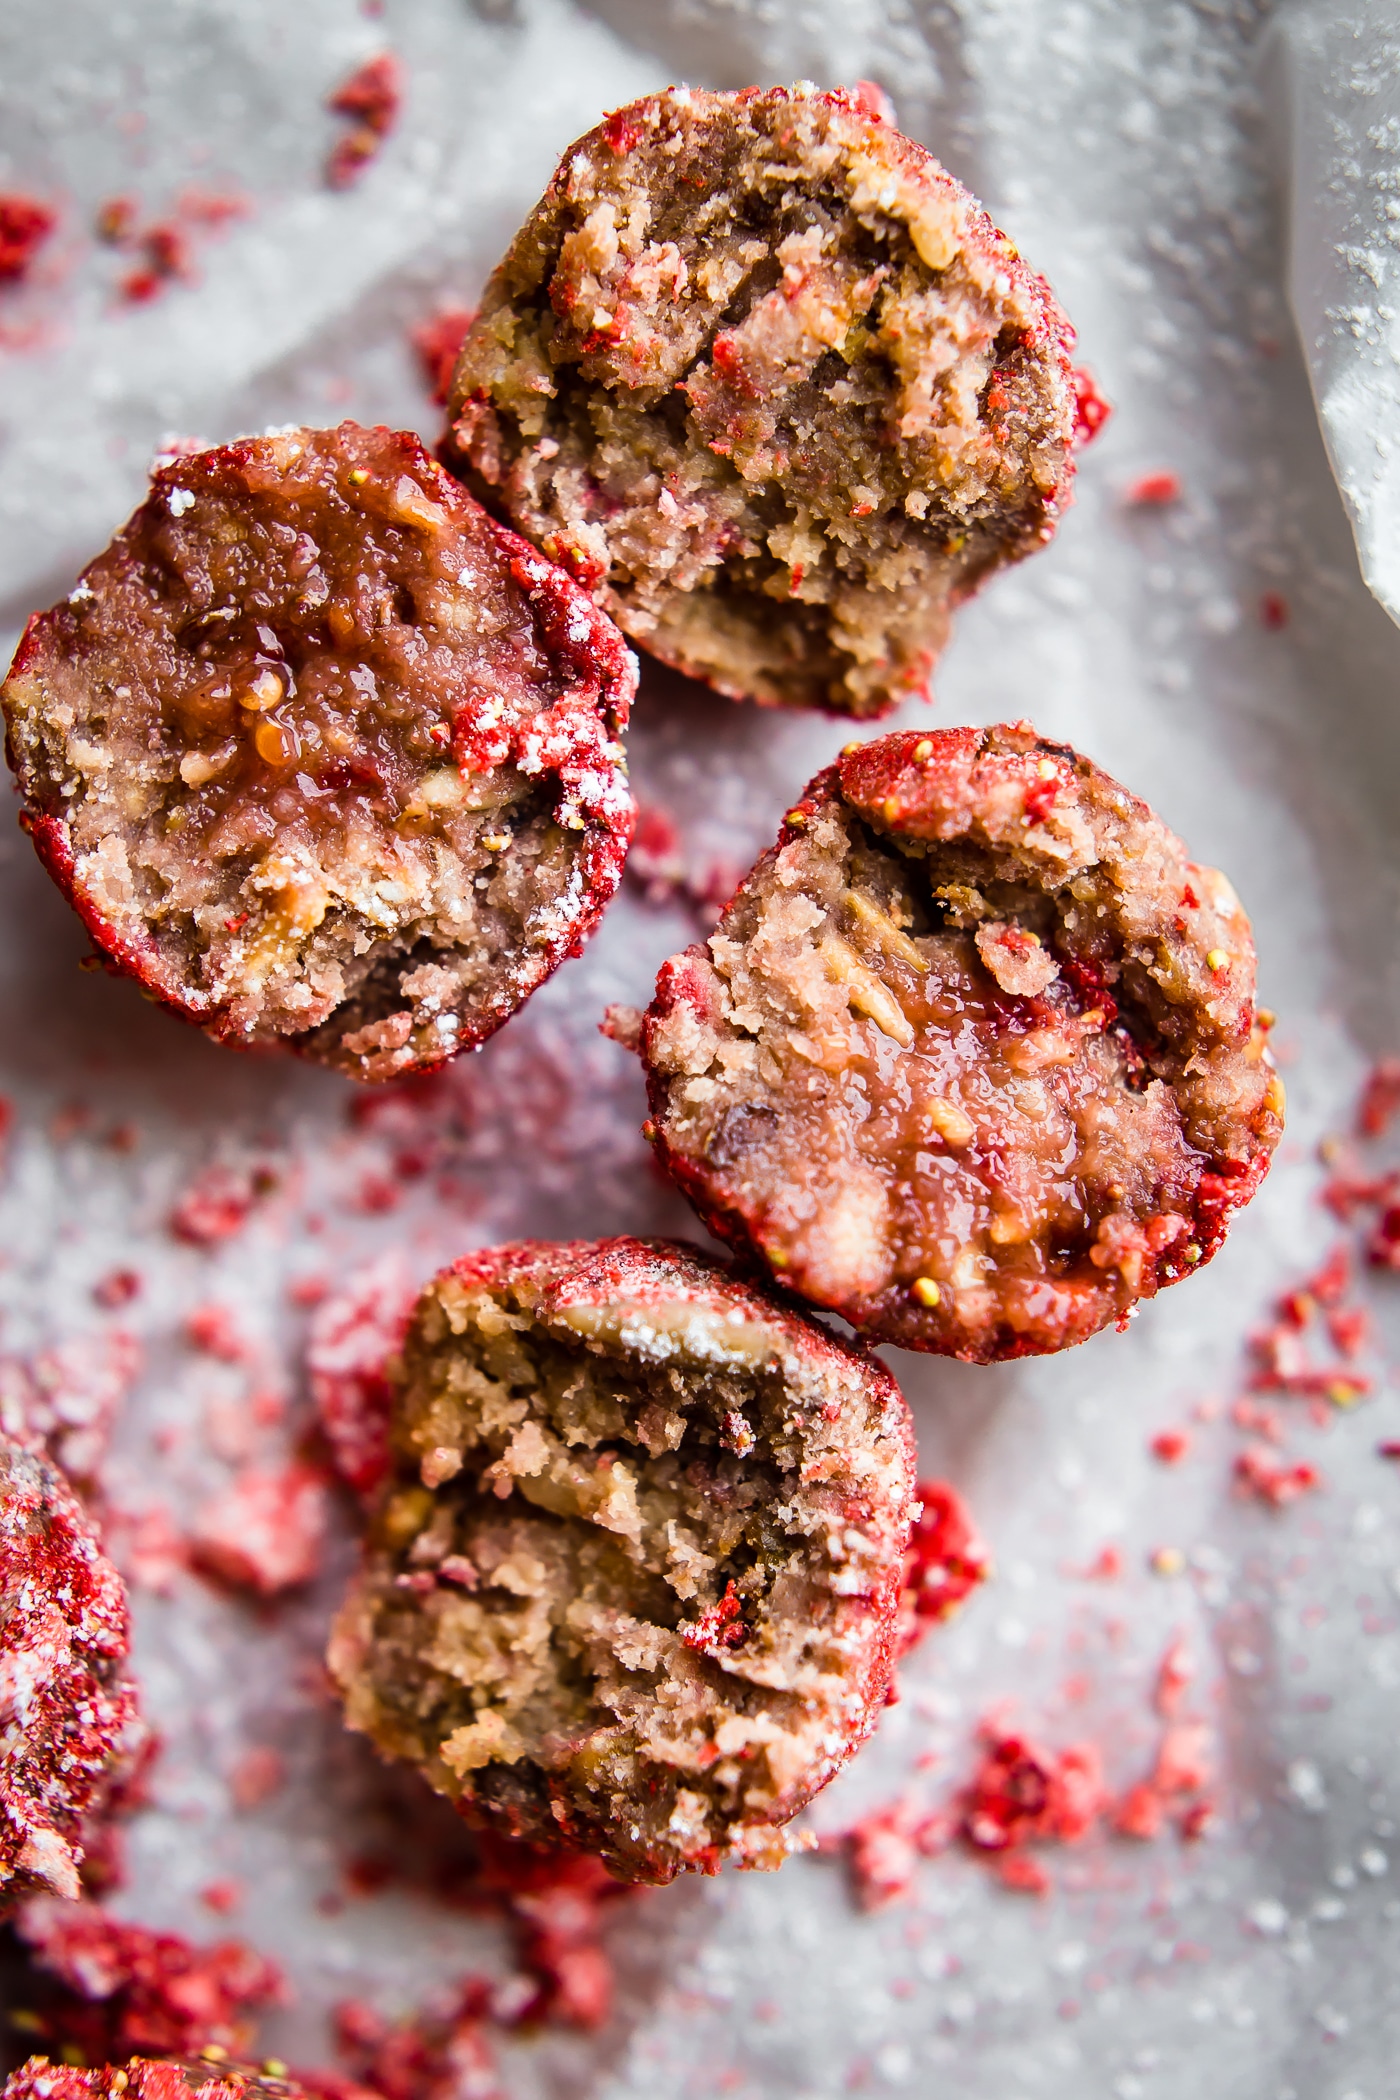 These Vegan No Bake Strawberry Cake Bliss Bites are the bite size healthy dessert. Just dried Strawberries, cashew cream, gluten free granola/flour, and a sweet jam filling! Tart and tasty! A vegan cake bite that requires no baking, just blissfully nourishing. Paleo friendly.